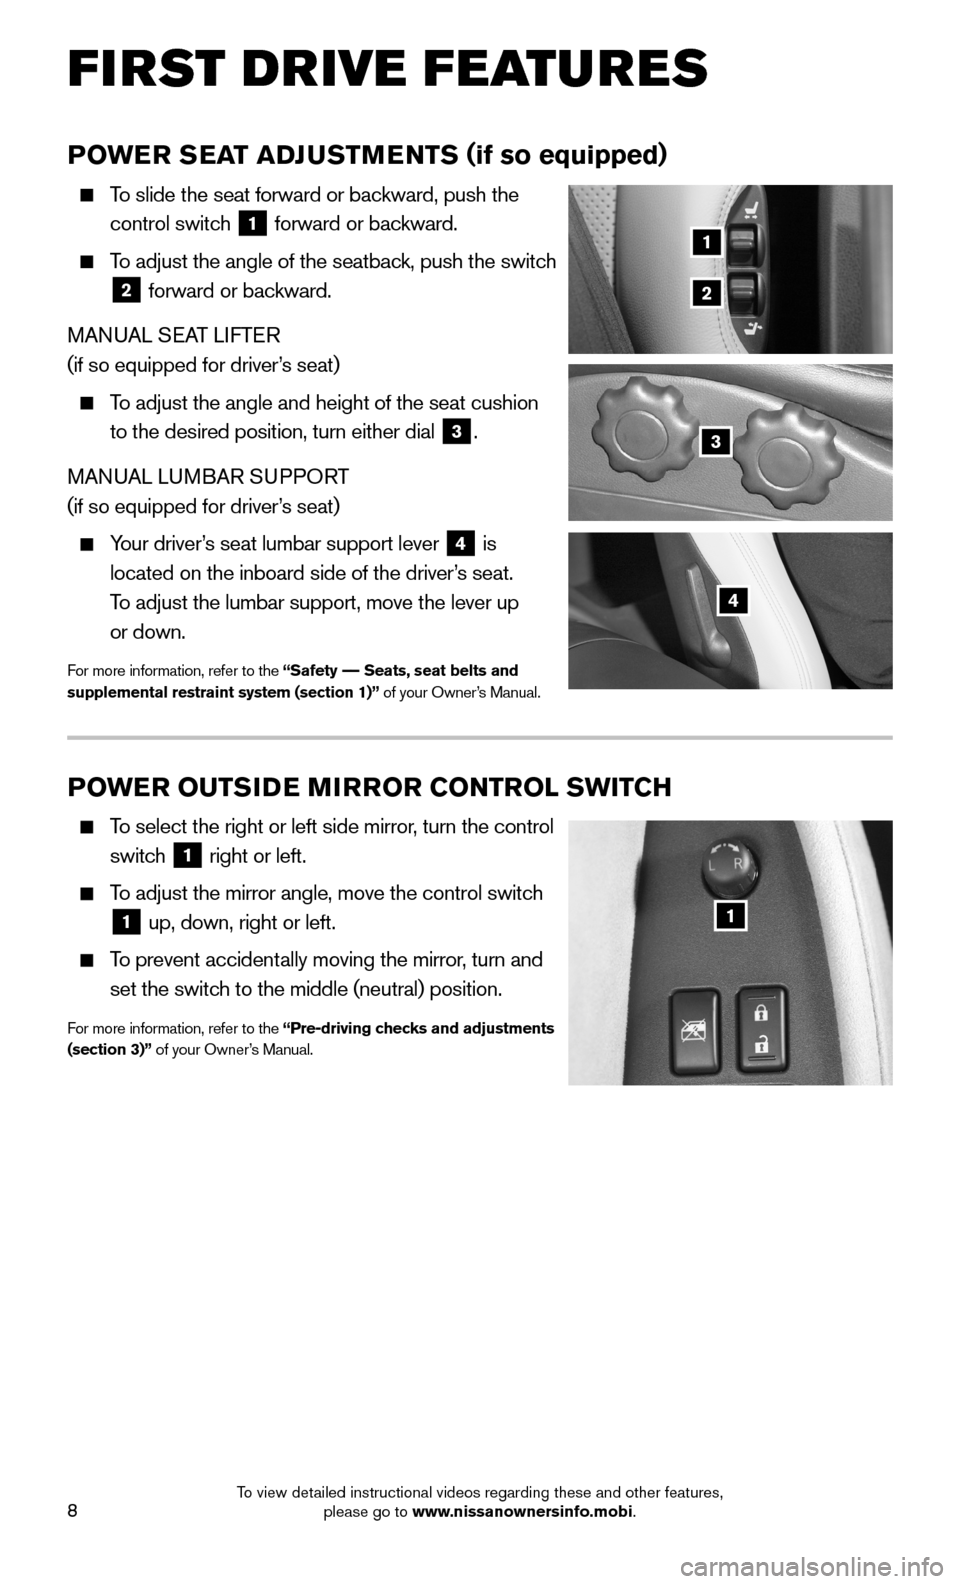 NISSAN 370Z ROADSTER 2015 Z34 Quick Reference Guide 8
FIRST DRIVE FEATURES
POWER SEAT ADJUSTMENTS (if so equipped)
    To slide the seat forward or backward, push the 
control switch 1 forward or backward.
    To adjust the angle of the seatback, push 